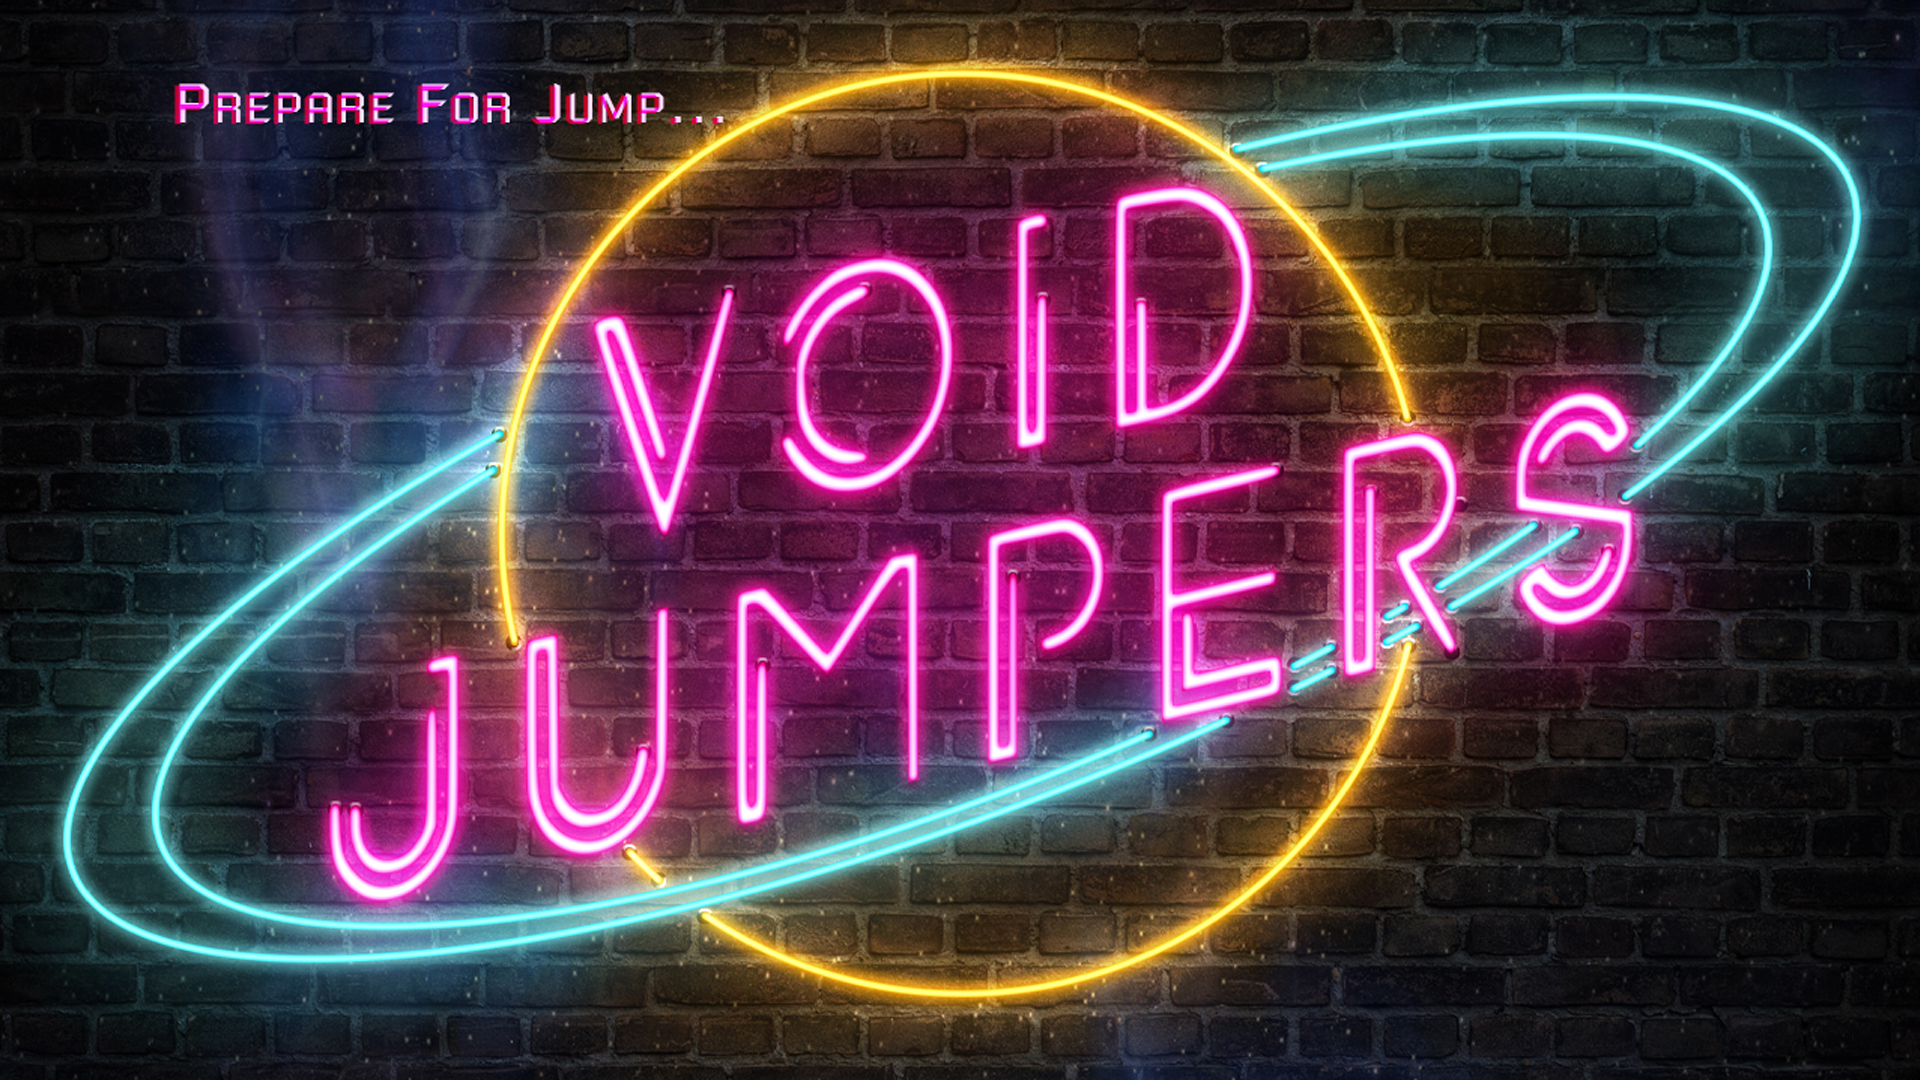 Large neon tube letters in pink say Void Jumpers over a yellow planet with cyan rings. A subscript reads Prepare For Jump